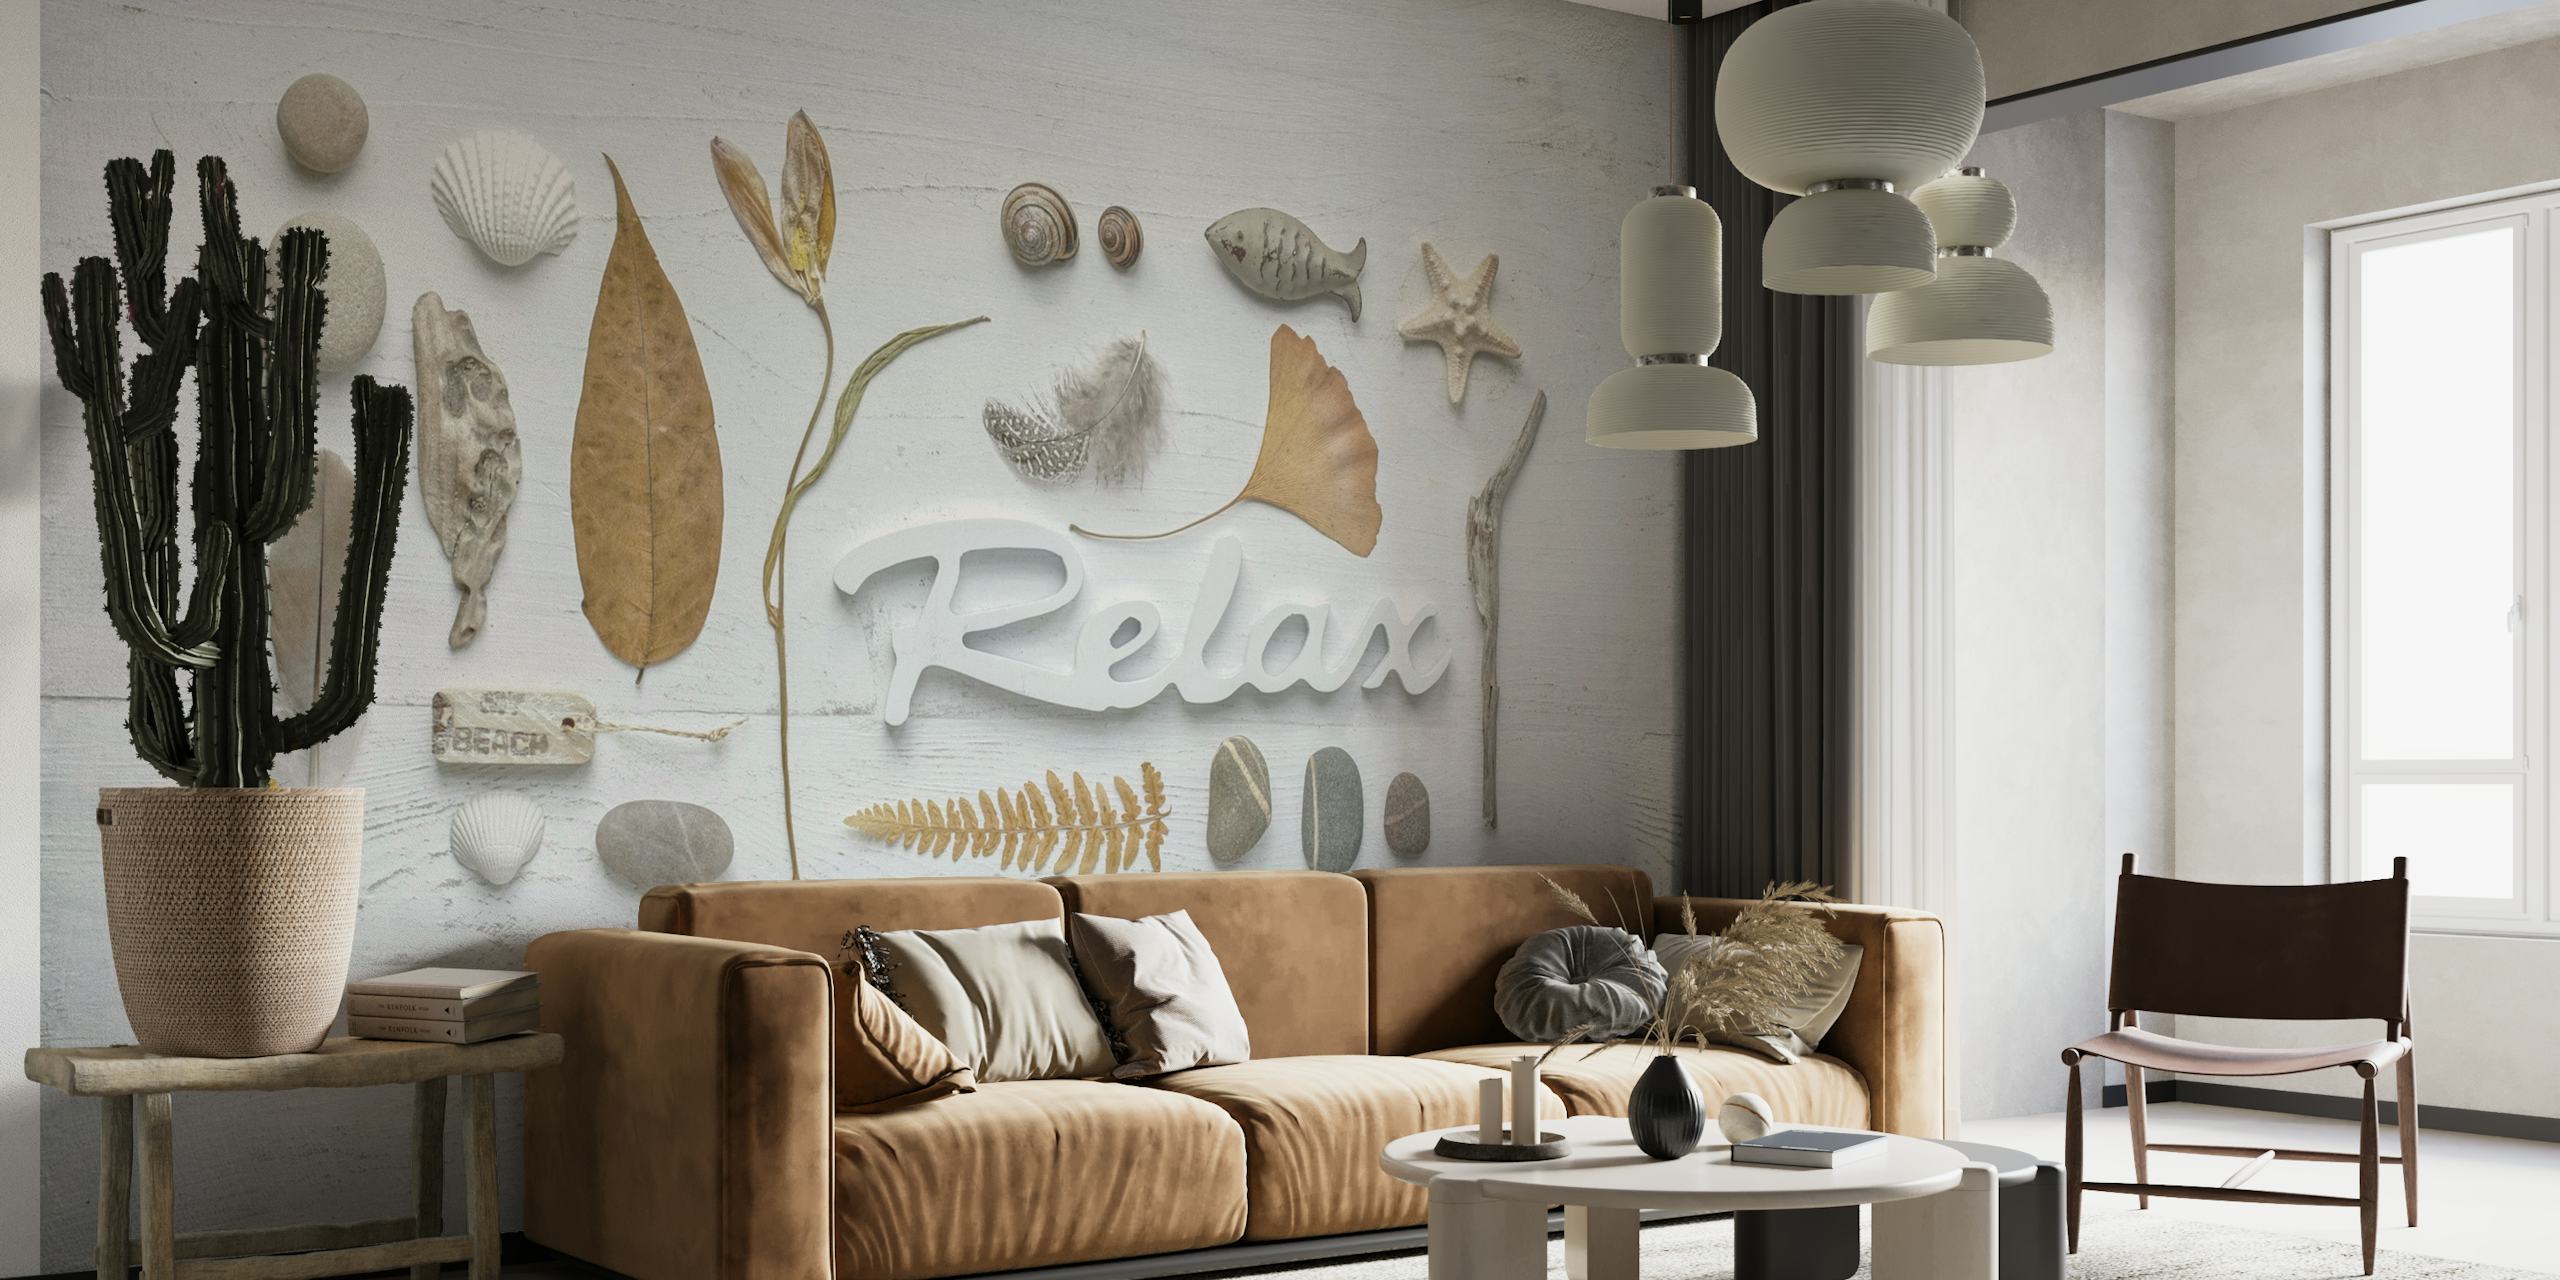 Relax Nature Collage wall mural with leaves, stones, and natural elements